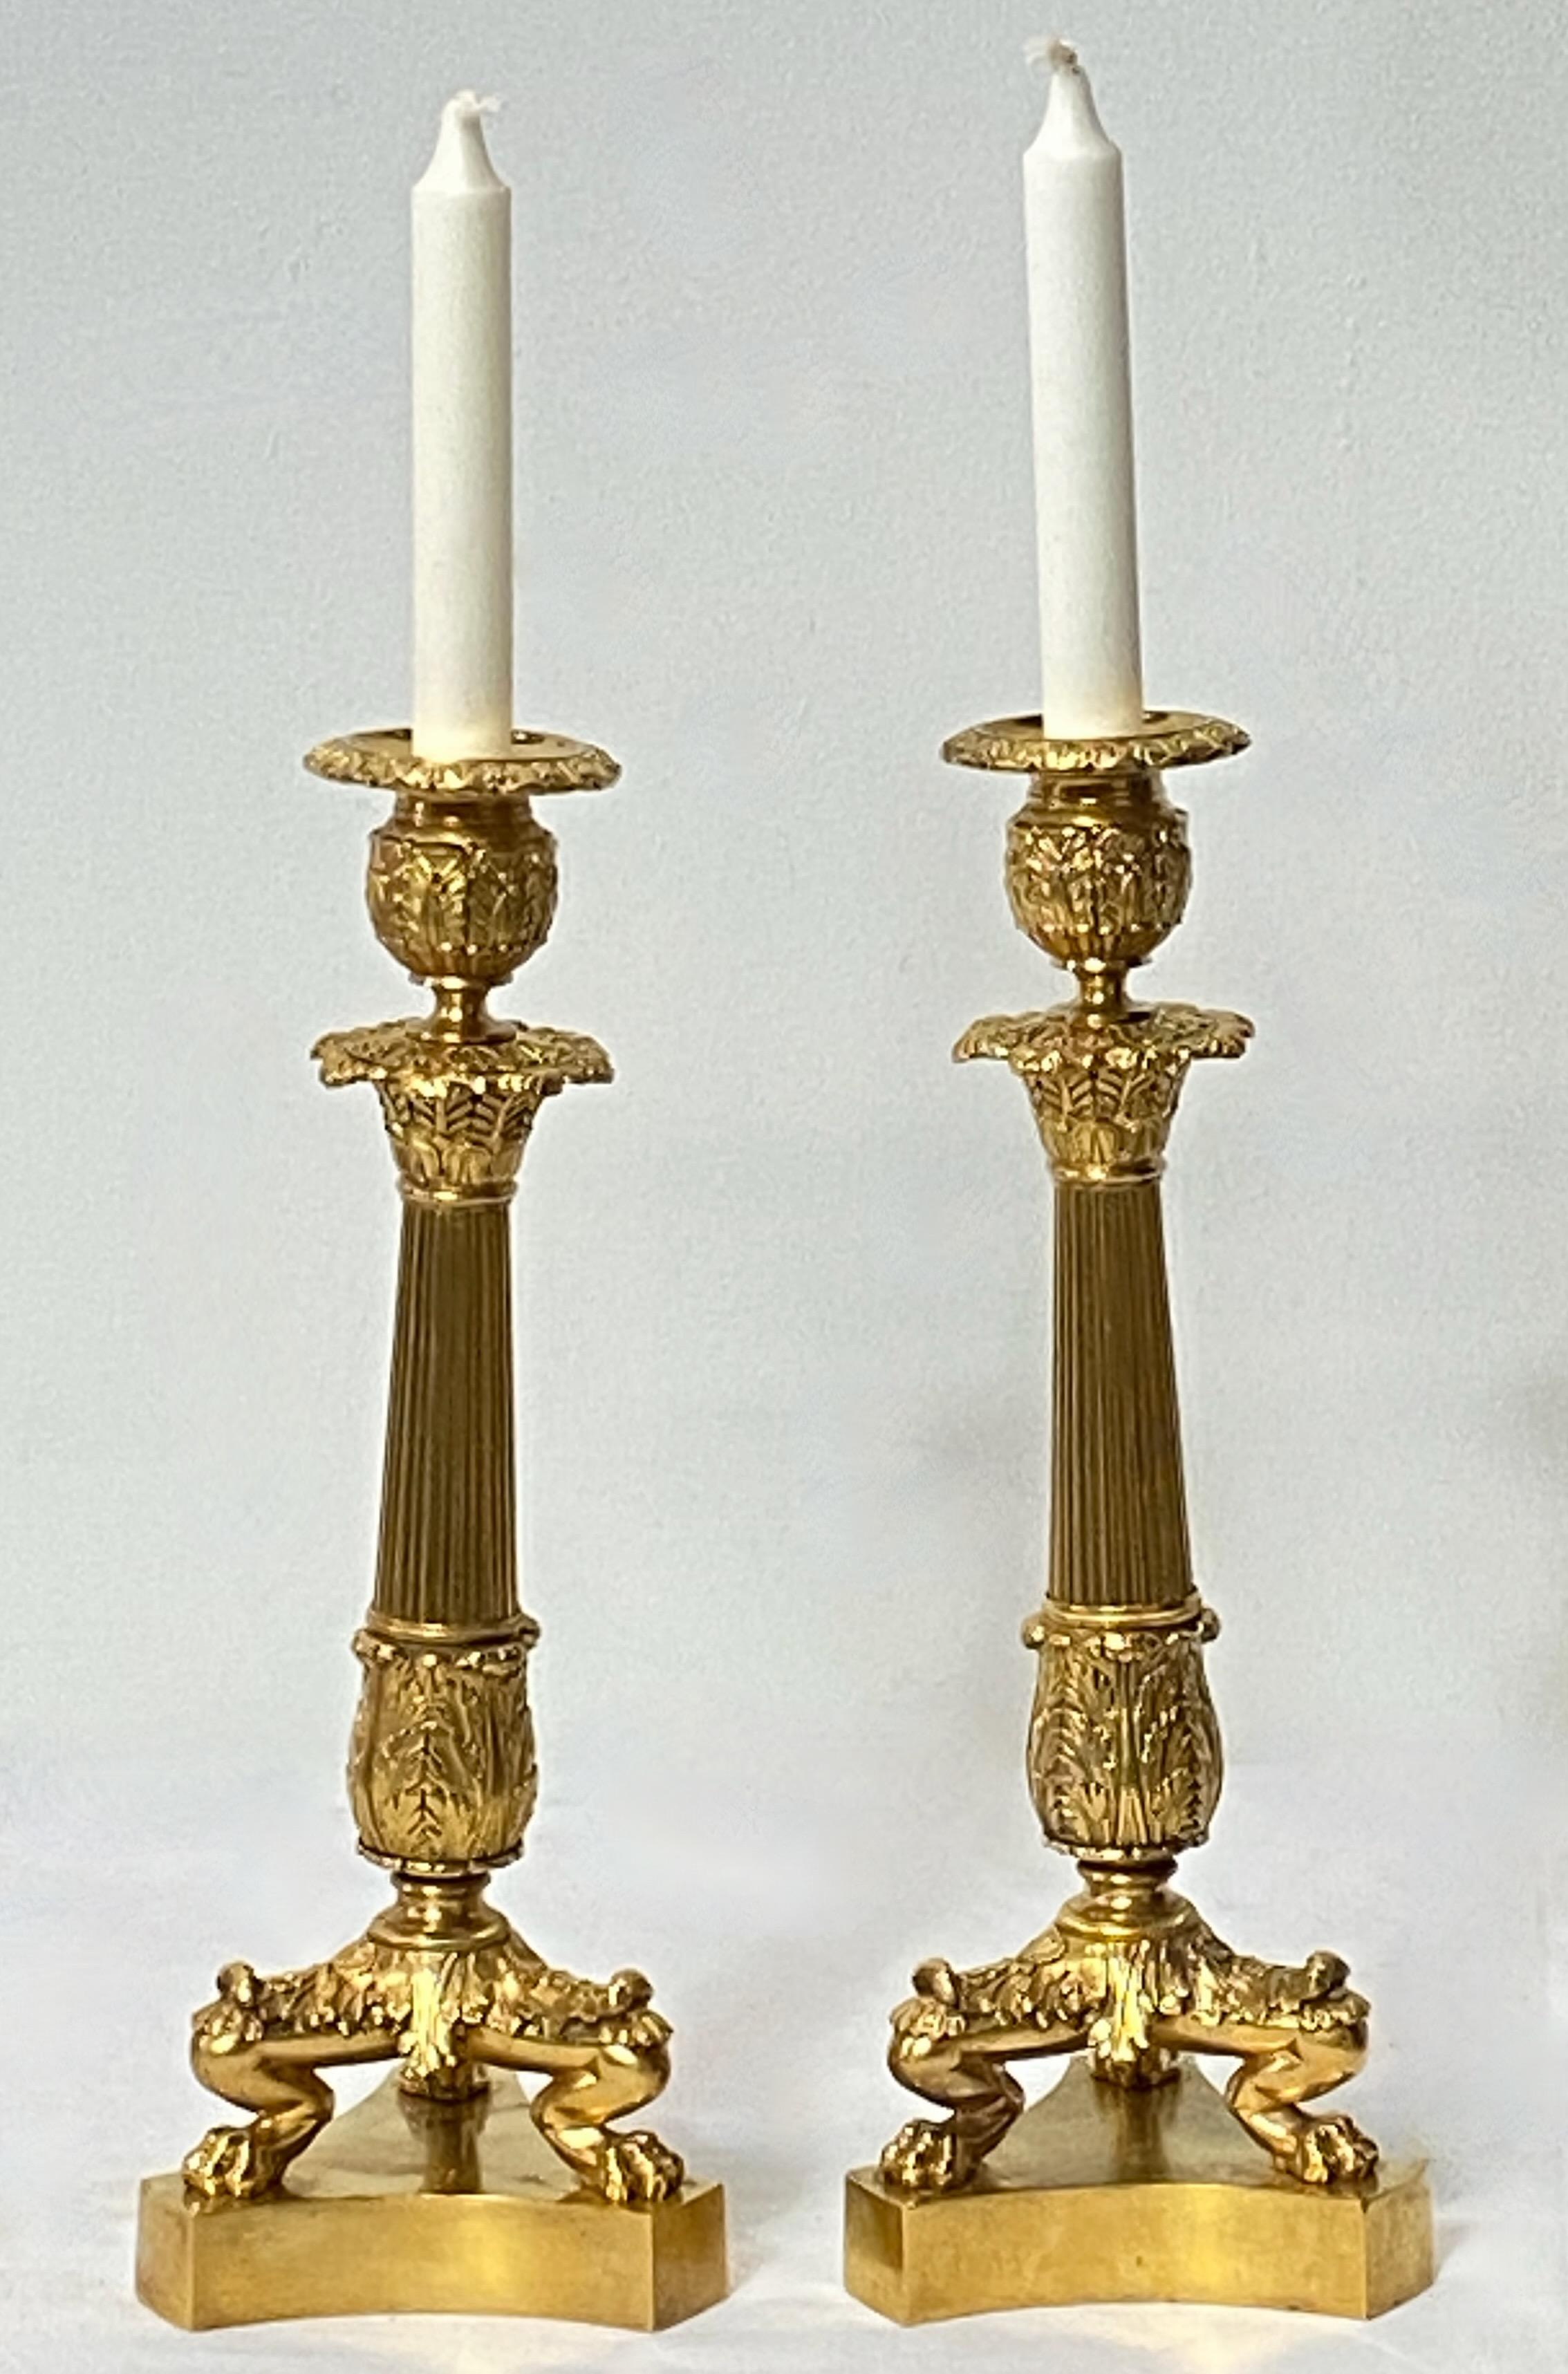 Pair of Early to Mid-19th Century French Empire Gilt Bronze Candlesticks For Sale 1